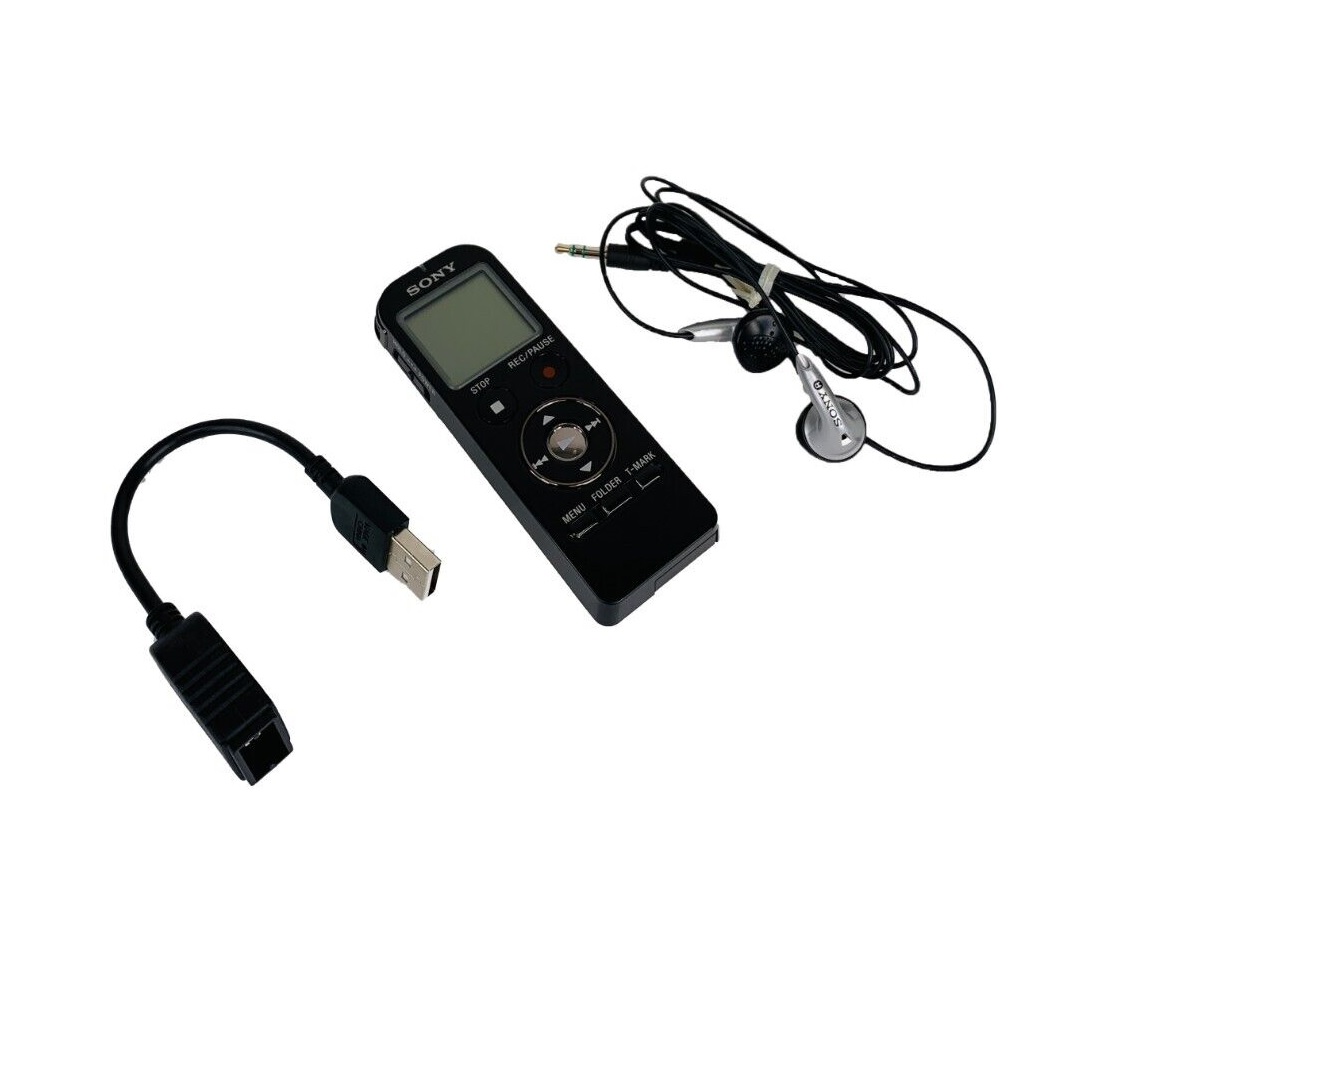 Sony ICD-UX533 4GB UX Series MP3 IC Stereo Digital Voice Recorder